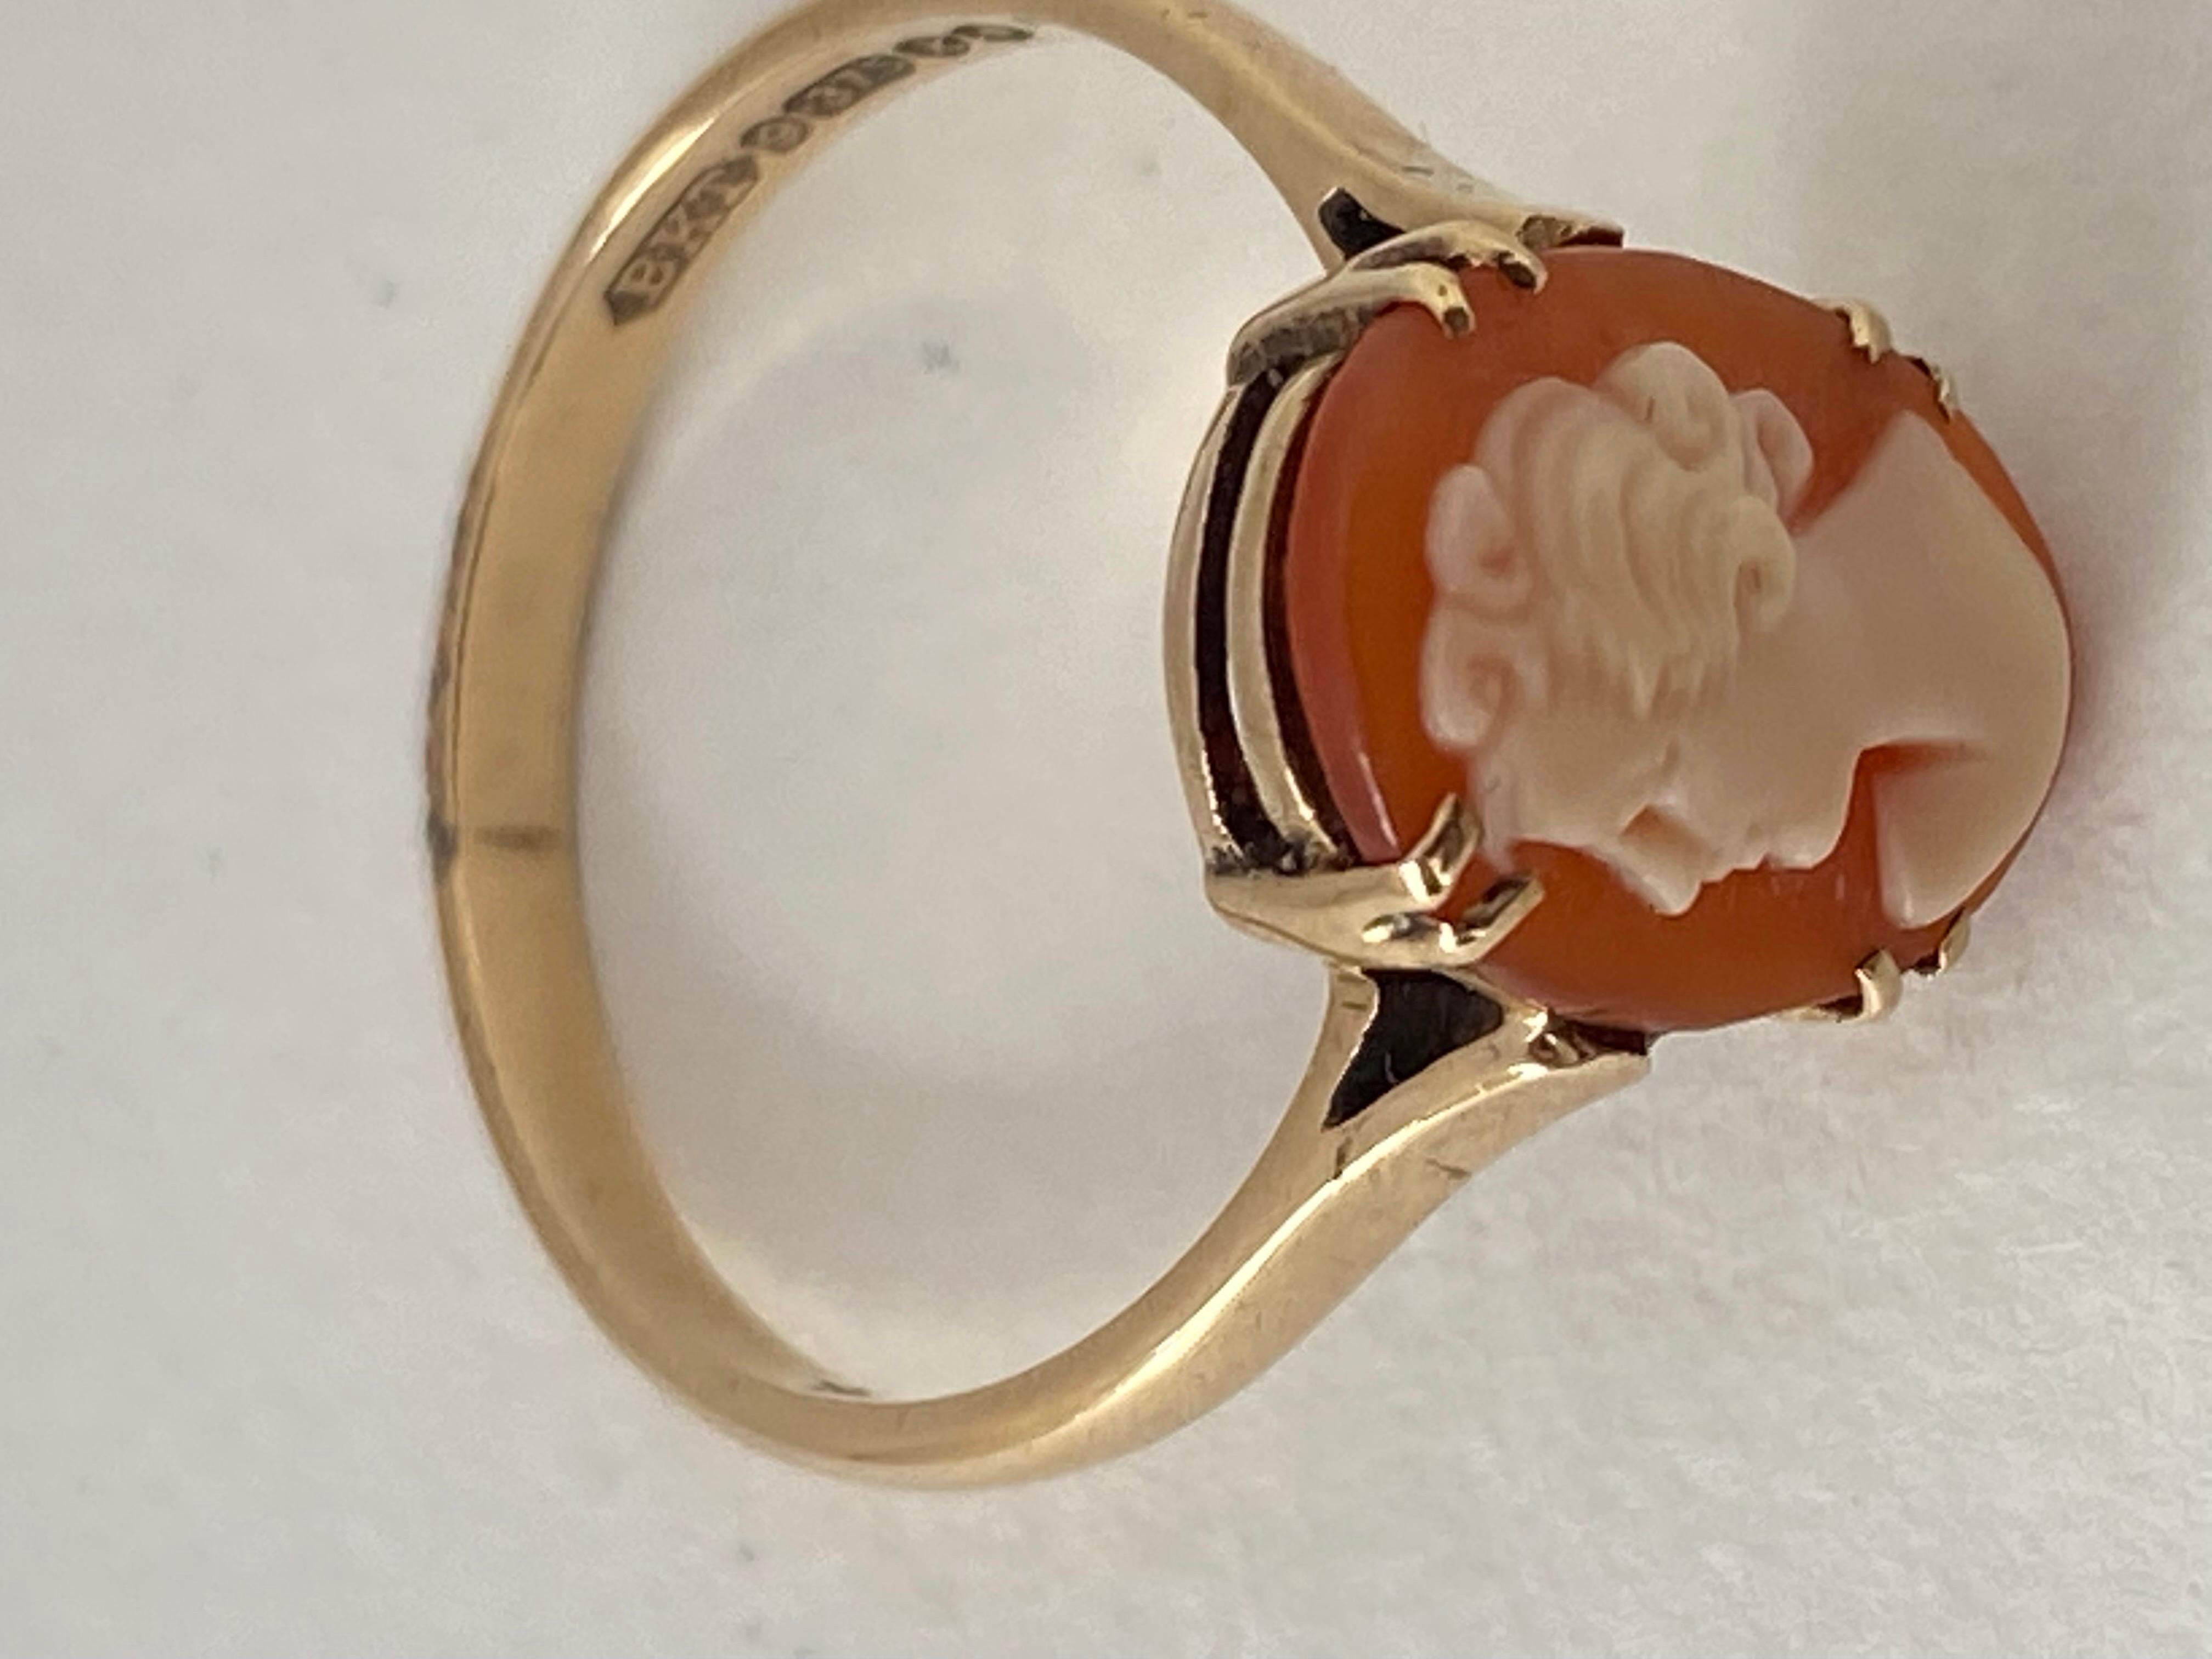 9 Karat Gold Cameo Ring In Good Condition For Sale In Carlisle, GB